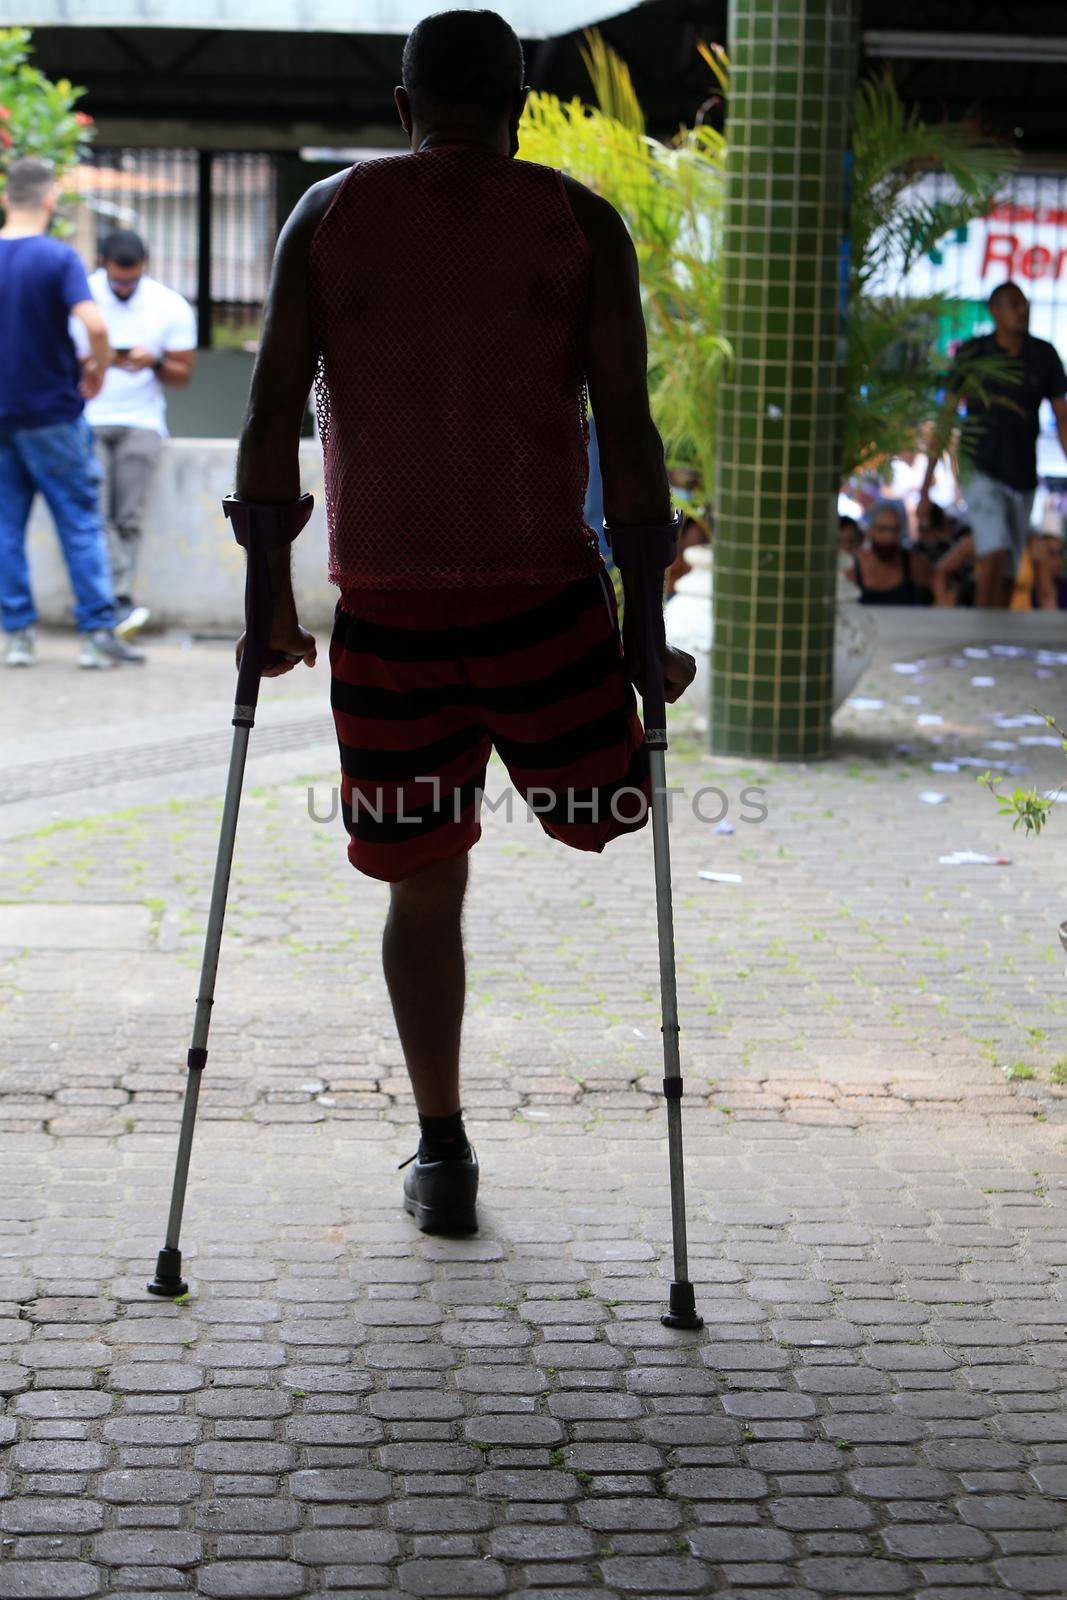 salvador, bahia, brazil - october 2, 2022: person using crutch seen in a voting section of a public school for general elections in the city of Salvador